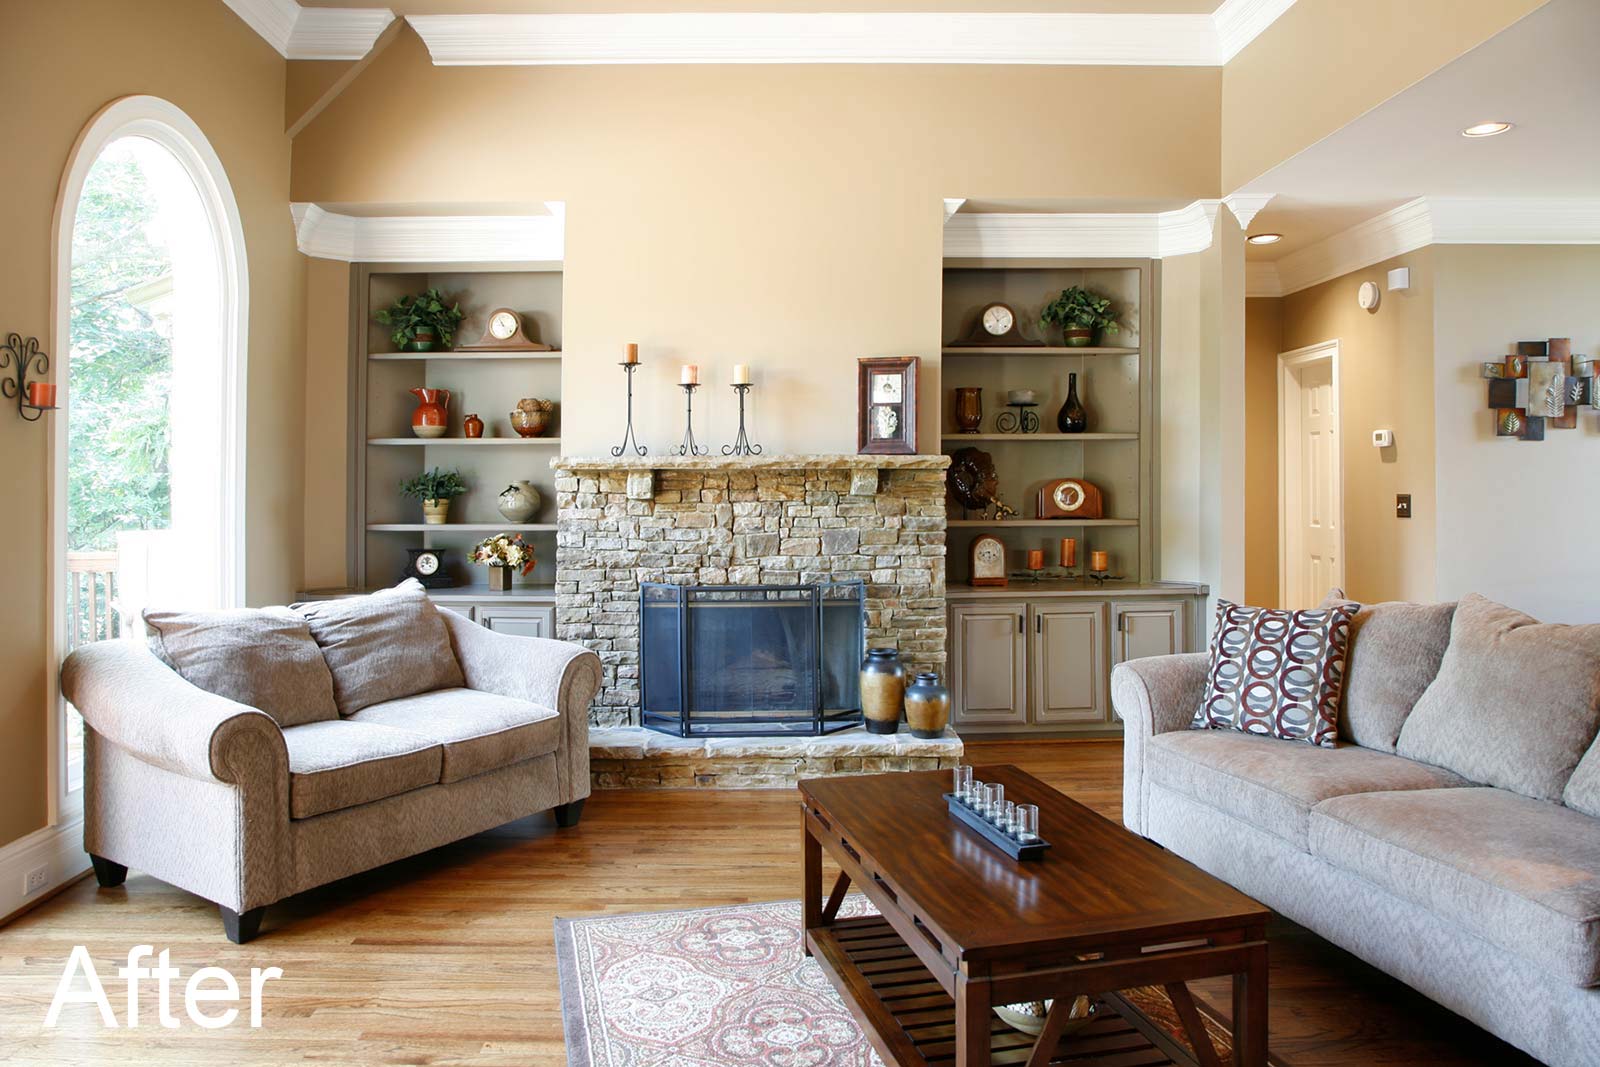 Living room remodeled with rustic stone fireplace and built-in bookcases